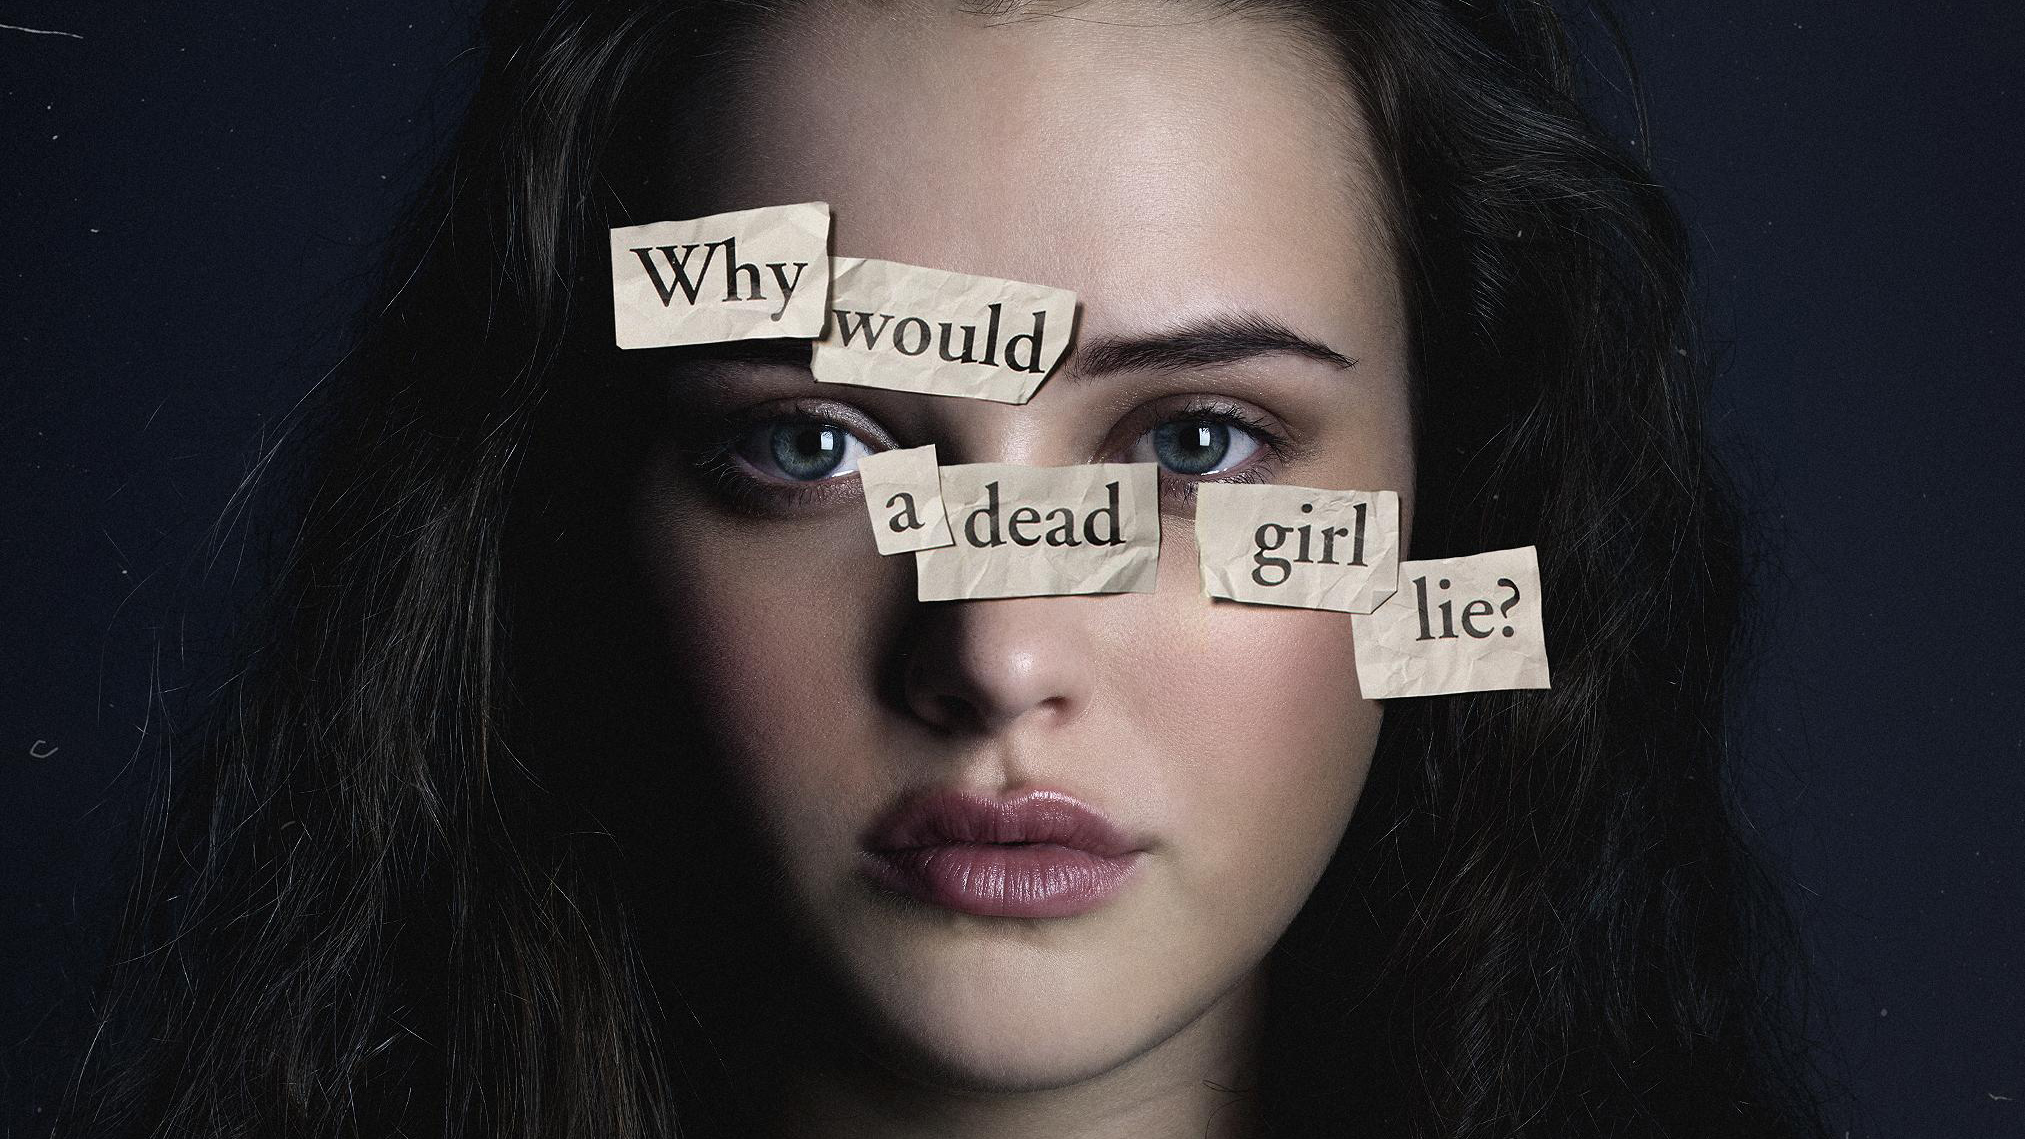 Hannah 13 Reasons Why Poster Wallpaper, HD TV Series 4K Wallpapers, Images,  Photos and Background - Wallpapers Den